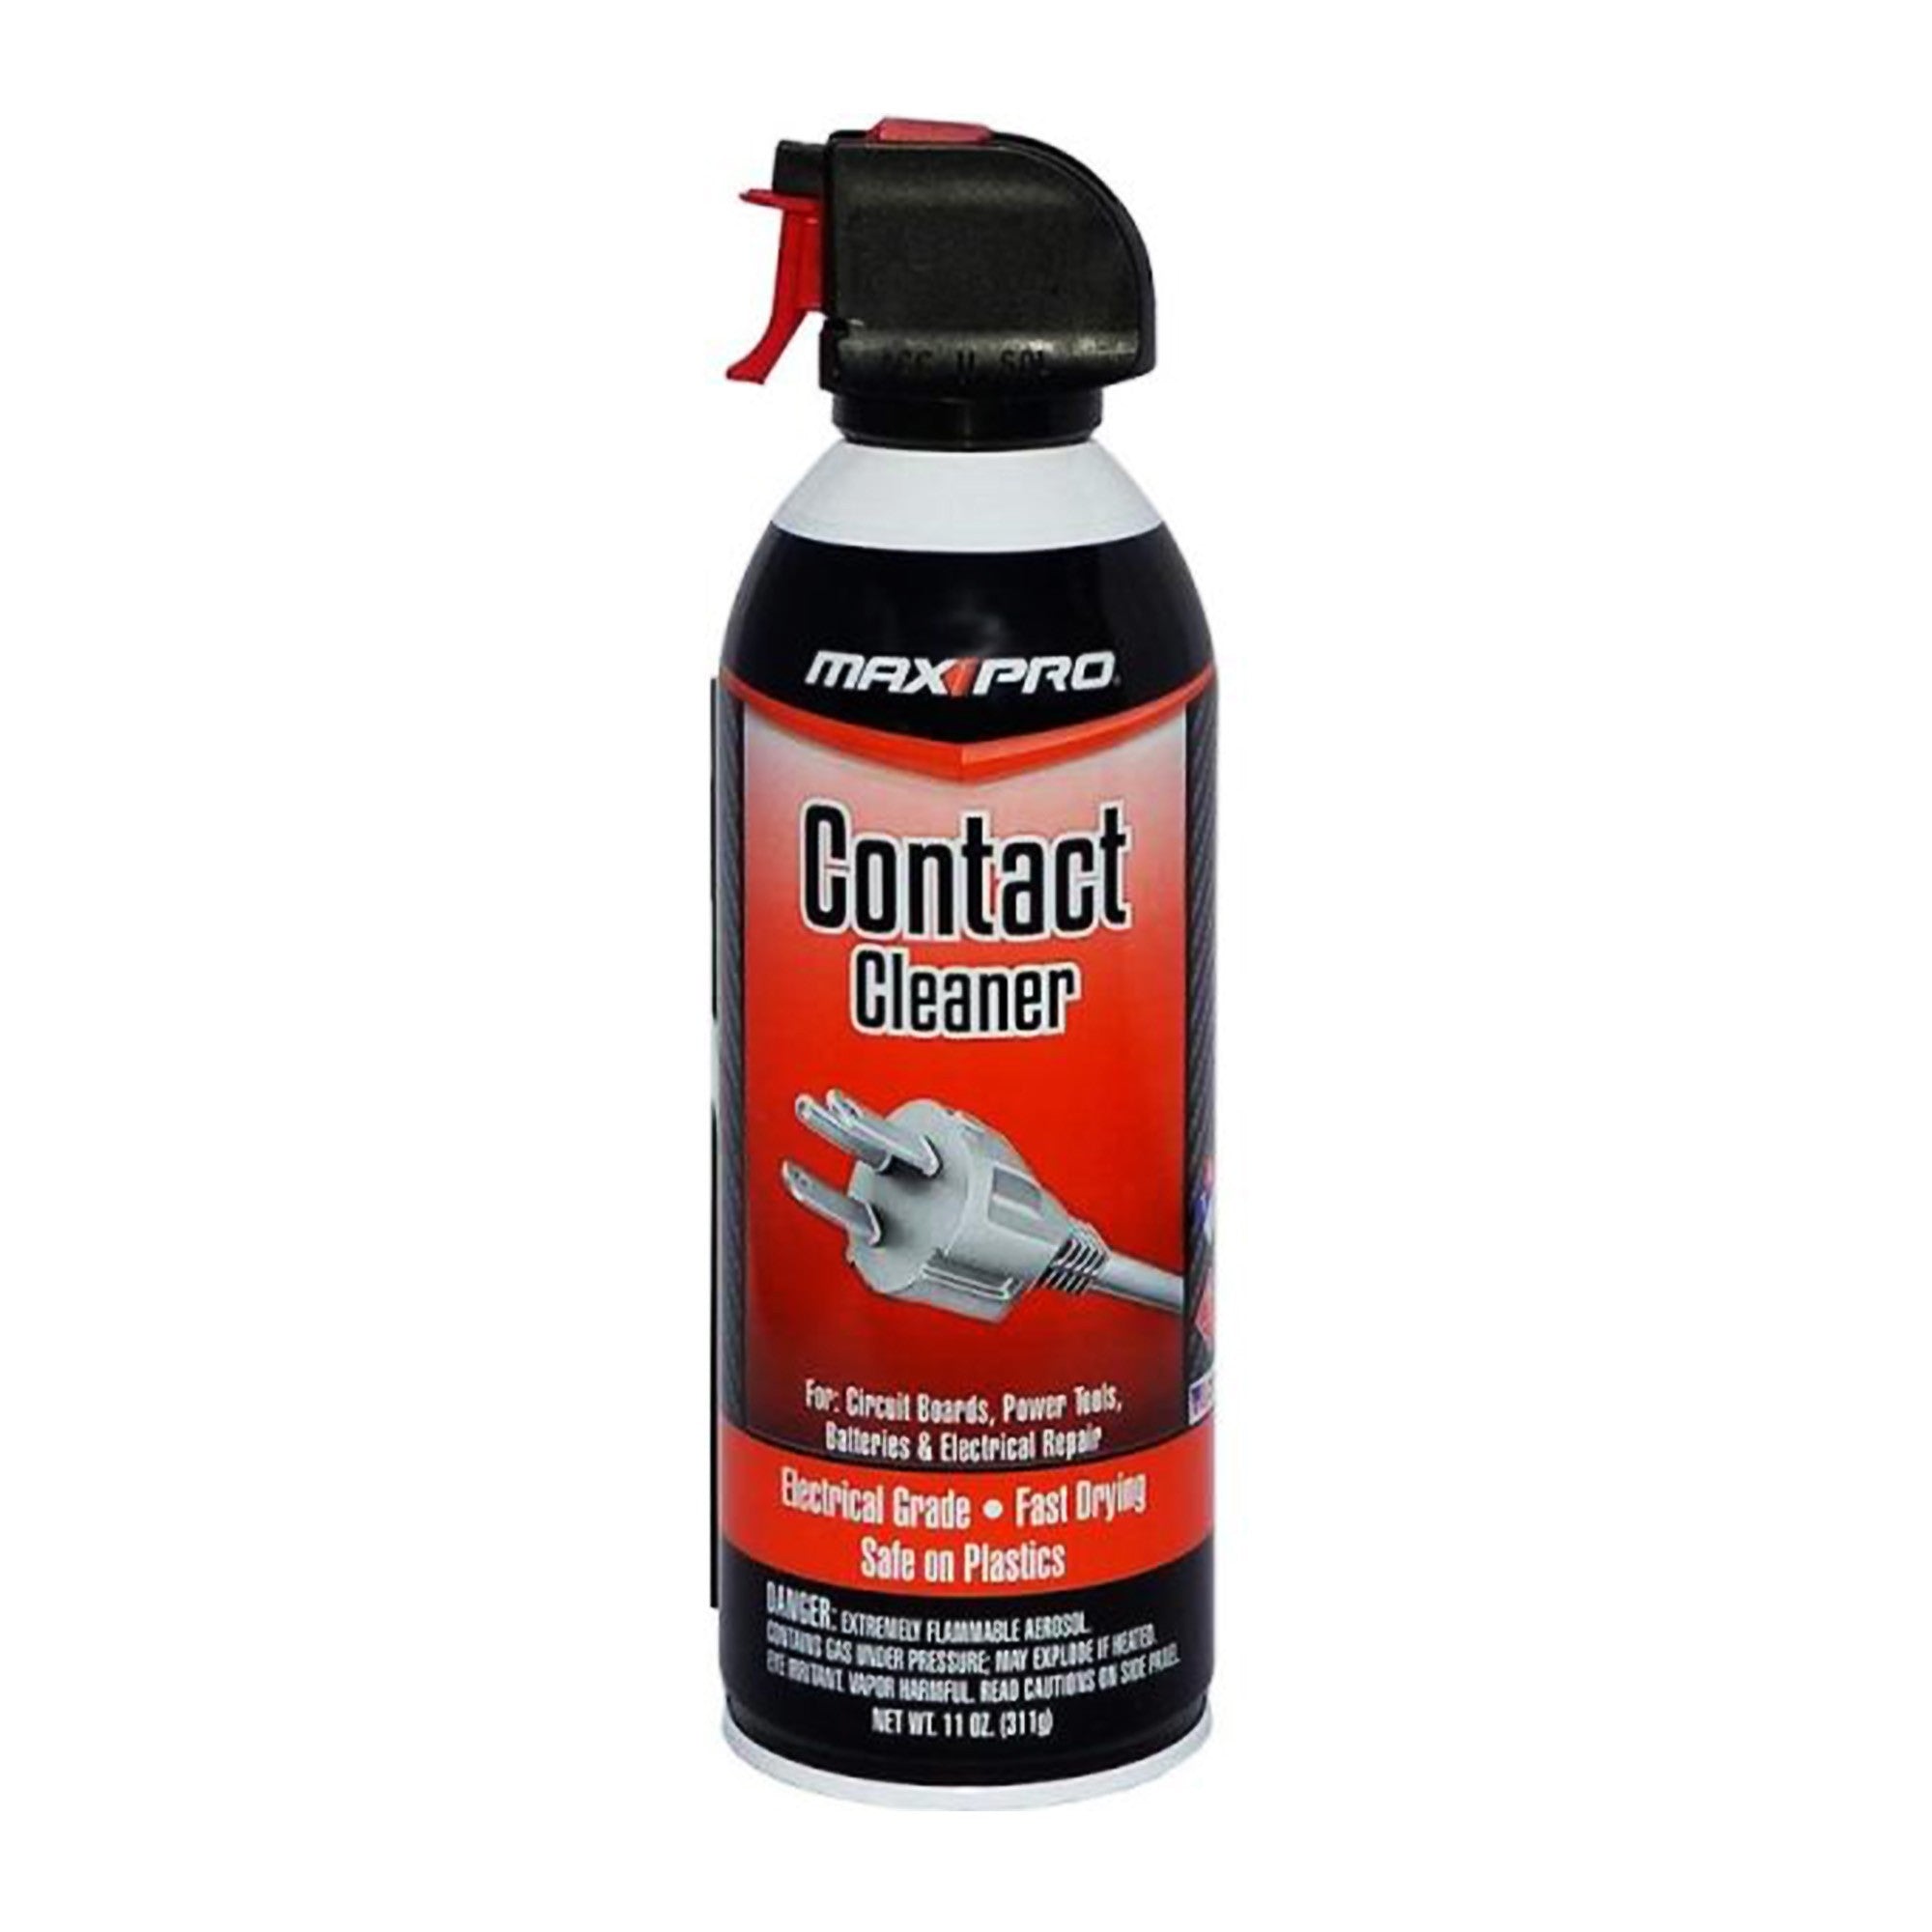 Blow Off Contact Cleaner - For Cleaning Electronic Parts - 8oz - 15-12809